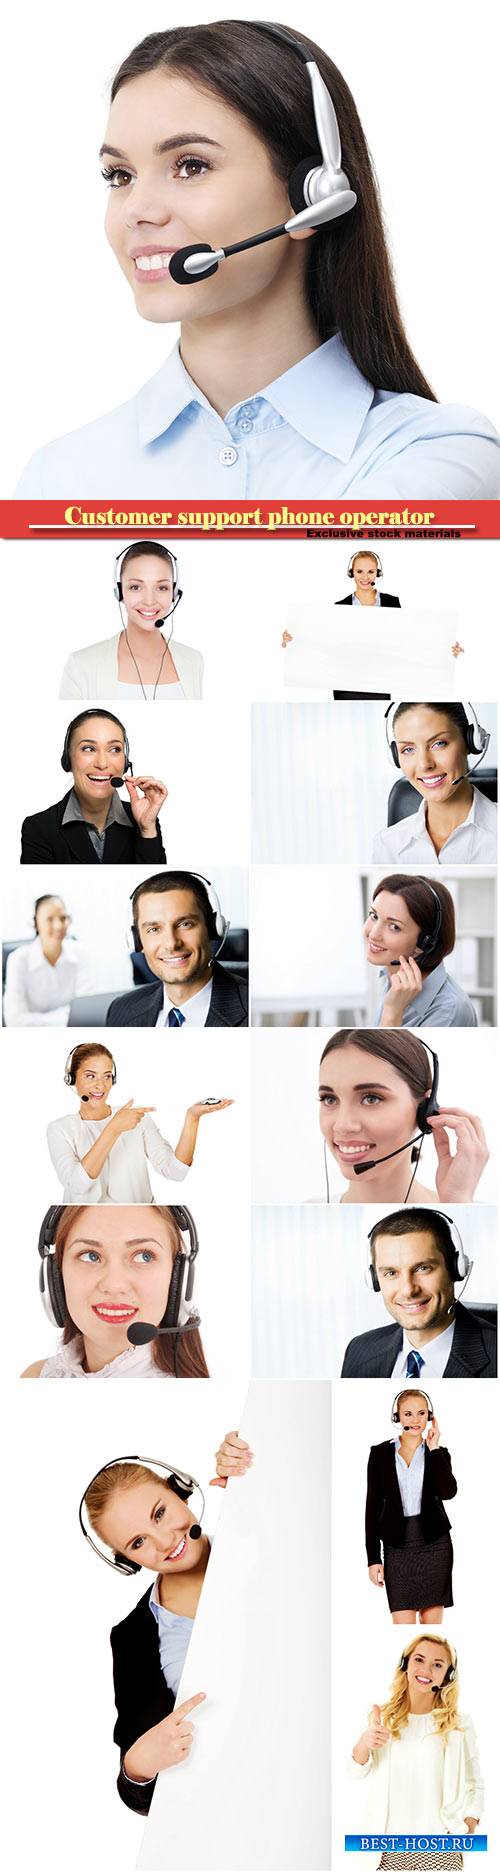 Customer support phone operator at office